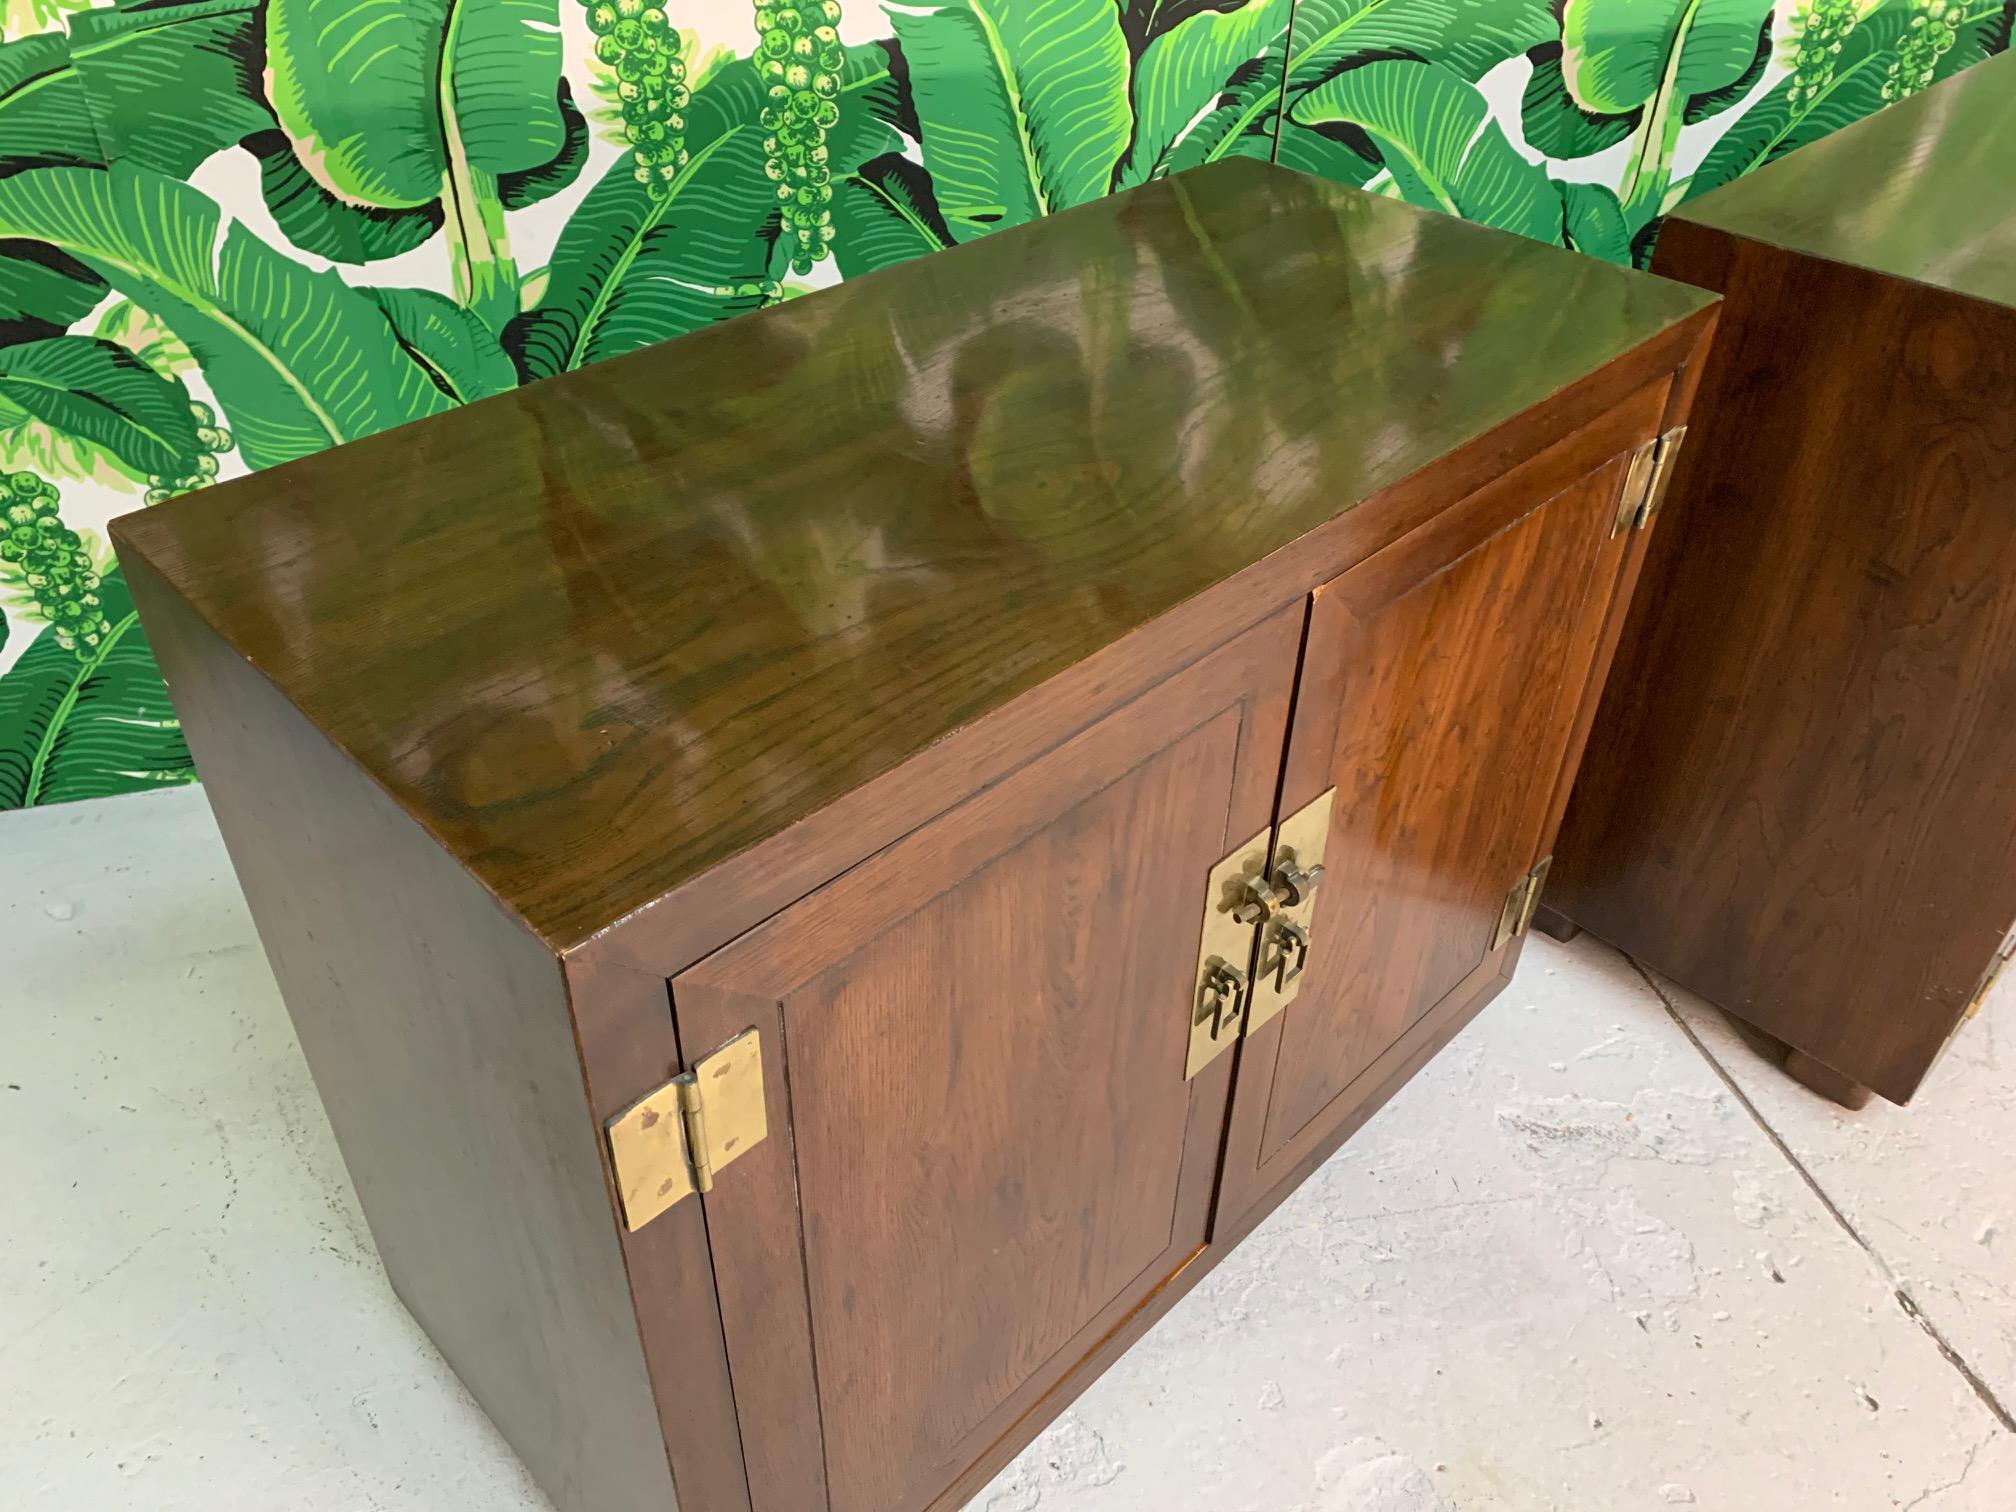 Pair of Henredon cabinets feature heavy brass hardware and double doors revealing large storage spaces. One cabinet with inner drawer and shelf, the other with single shelf. Very good condition with very minor imperfections consistent with age.